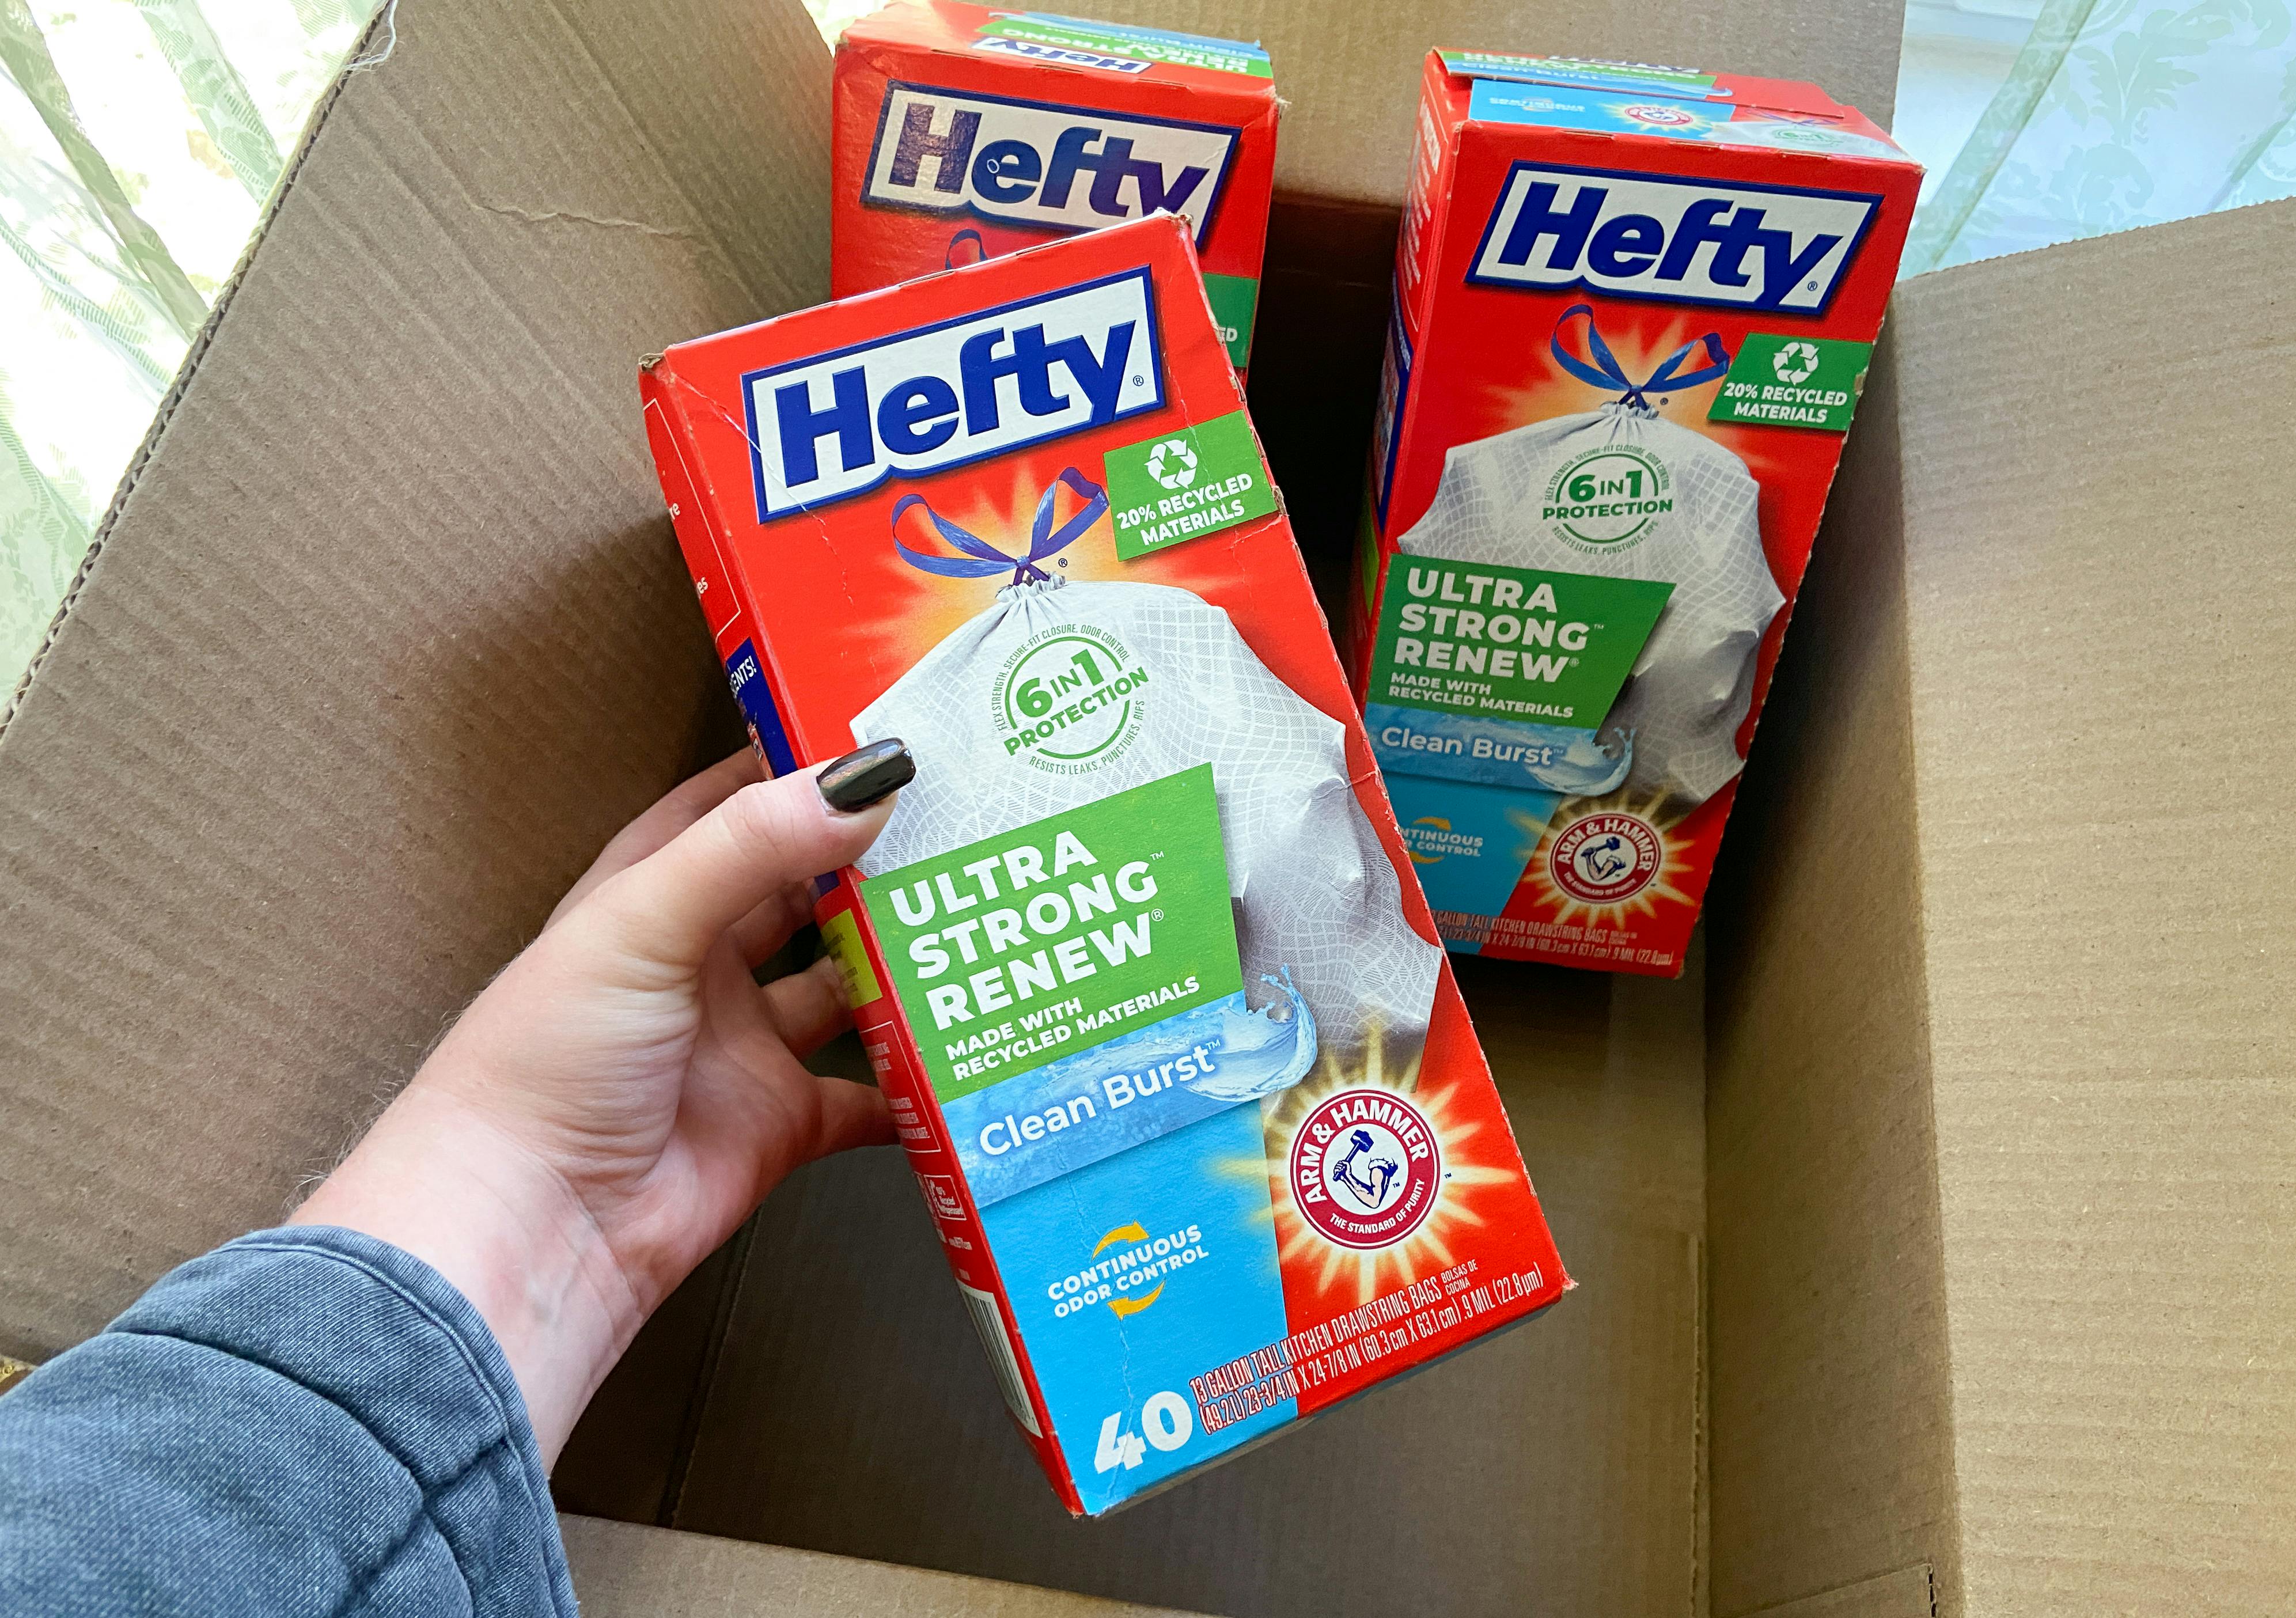 Hand holding a box of hefty ultra strong trash bags over an amazon box